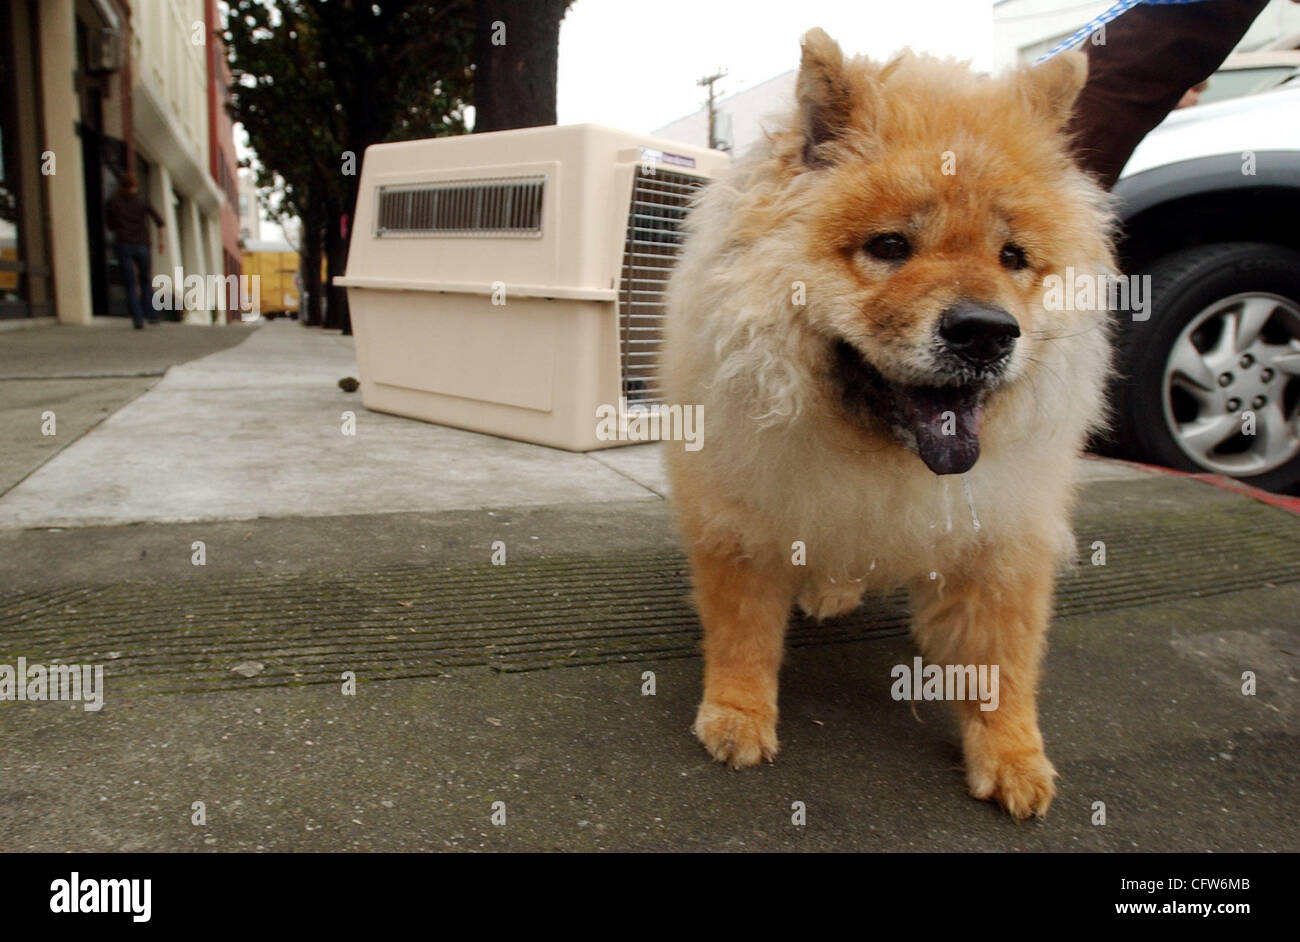 Queenie A 9 Year Old Chow Chow Prepares For Her Flight